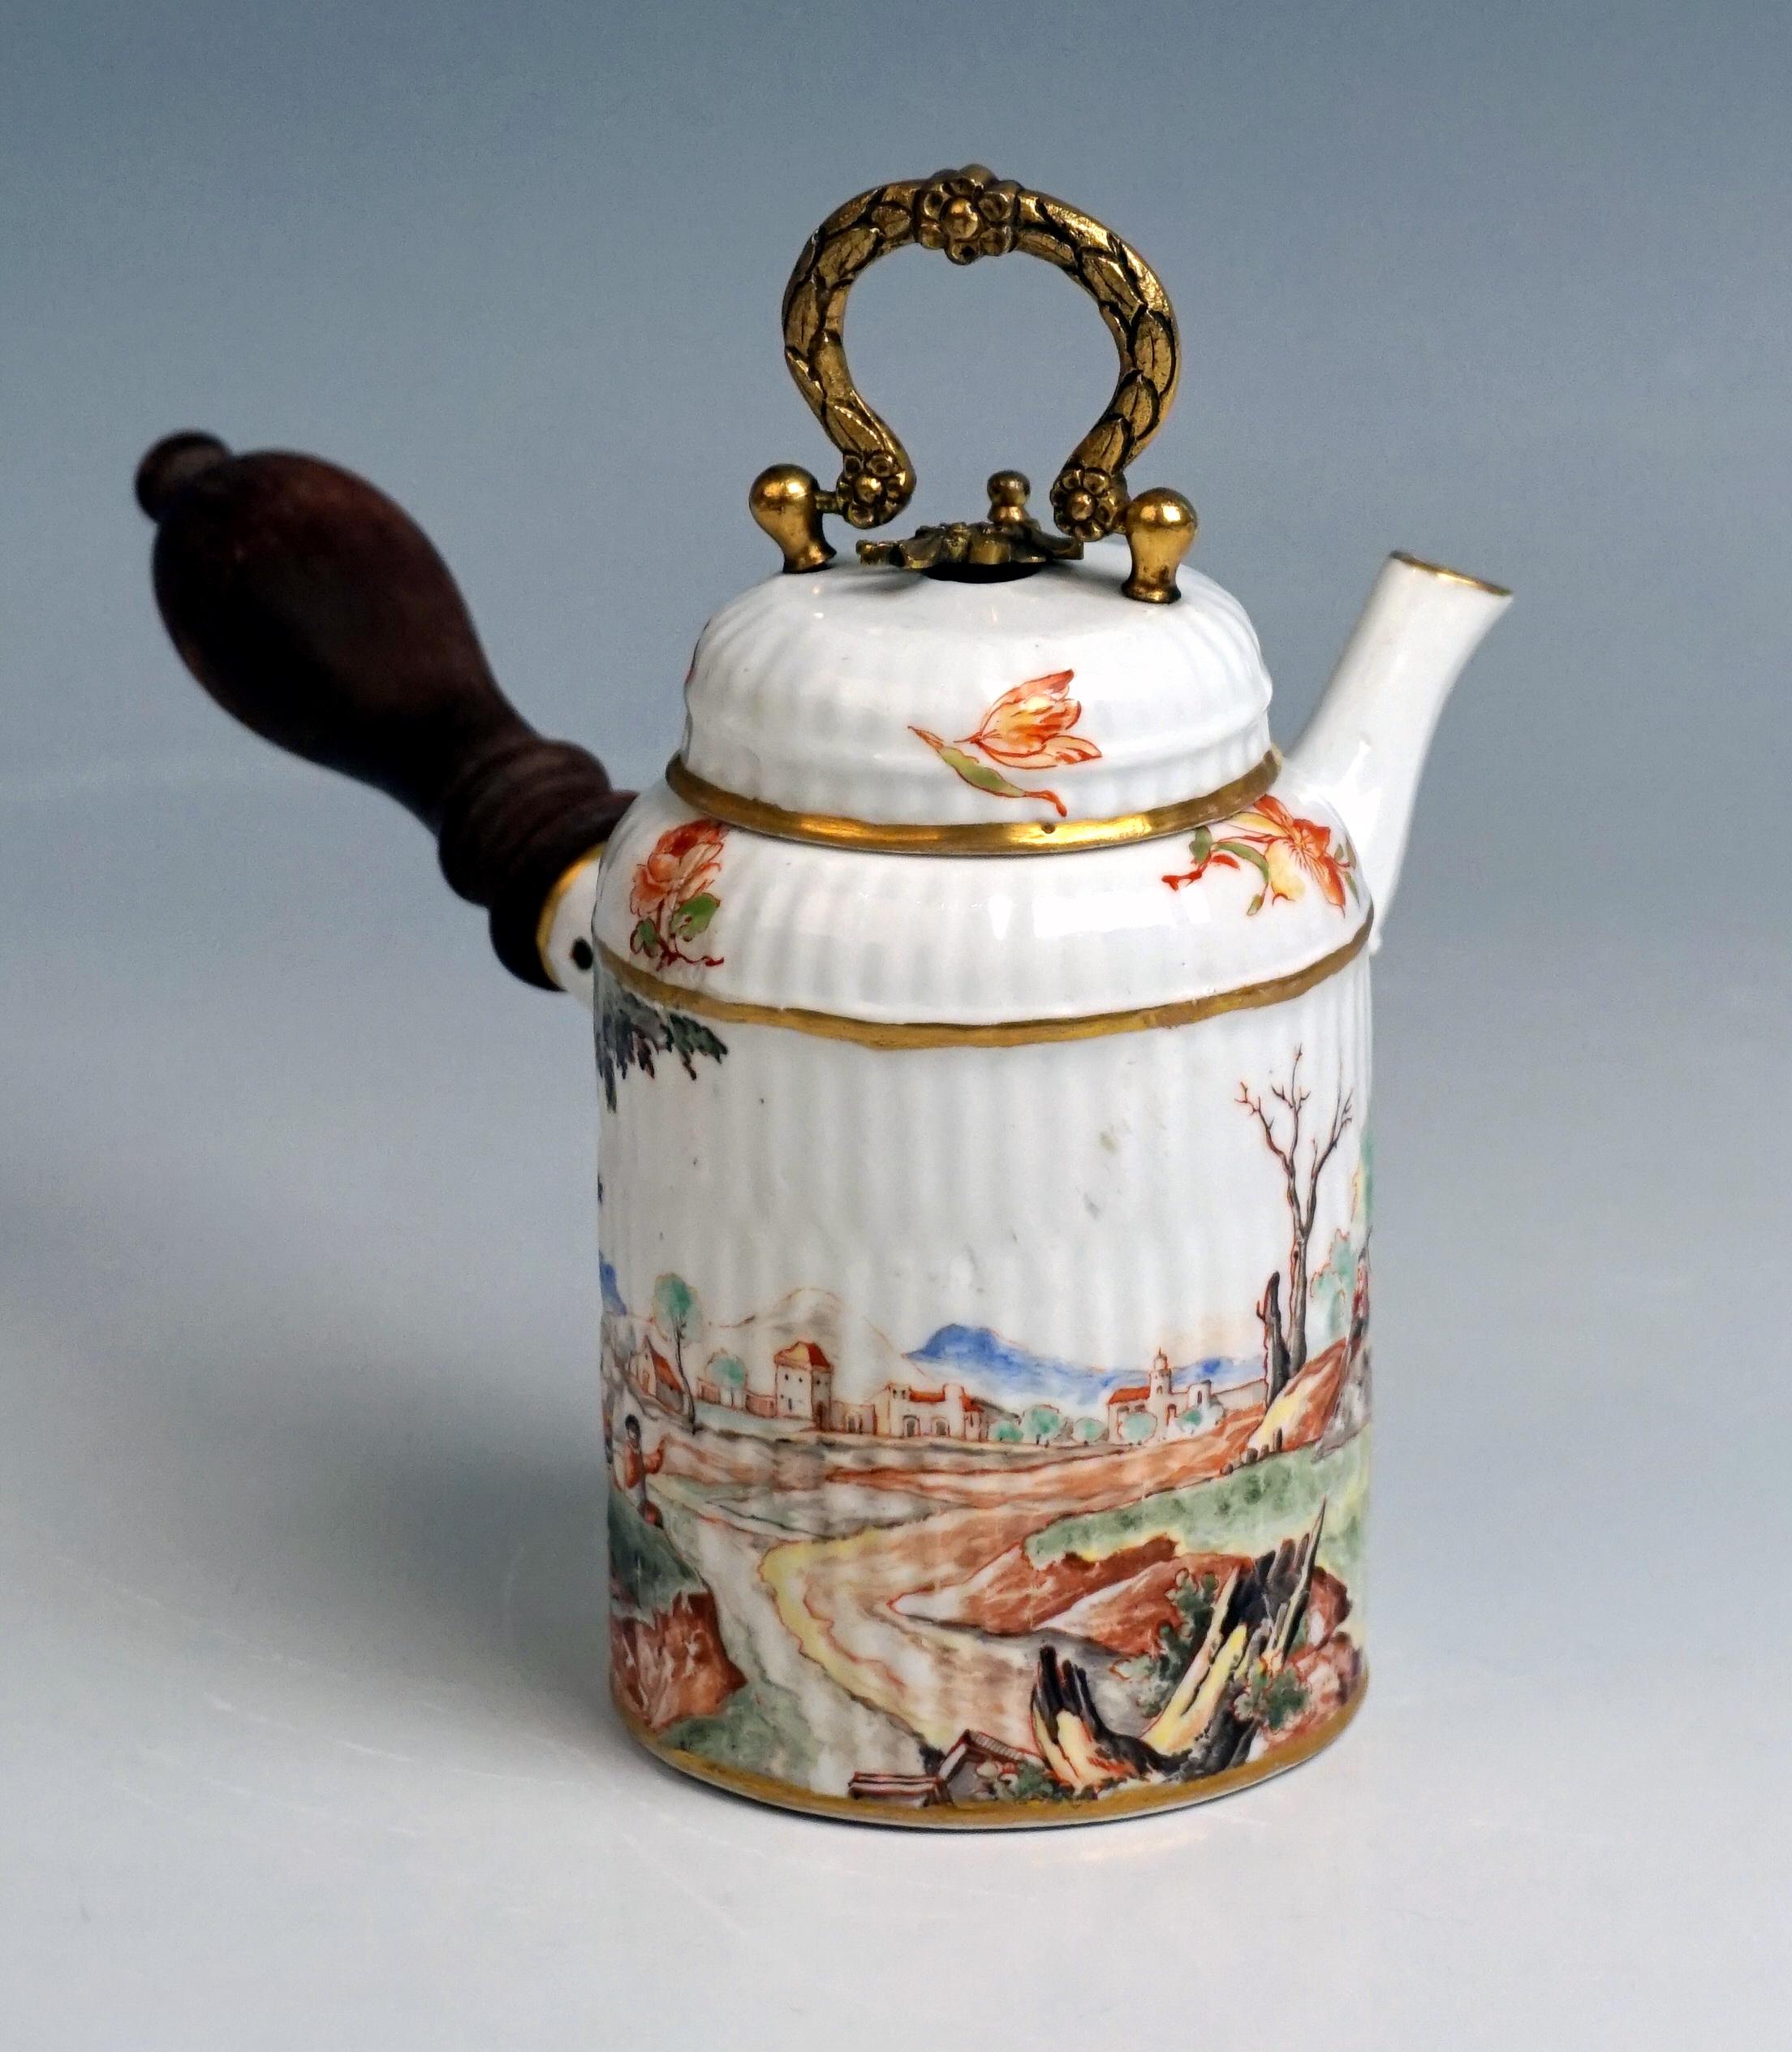 Hand-Crafted Meissen Rare Chocolate Pot with Landscape Decoration Baroque Period, circa 1740